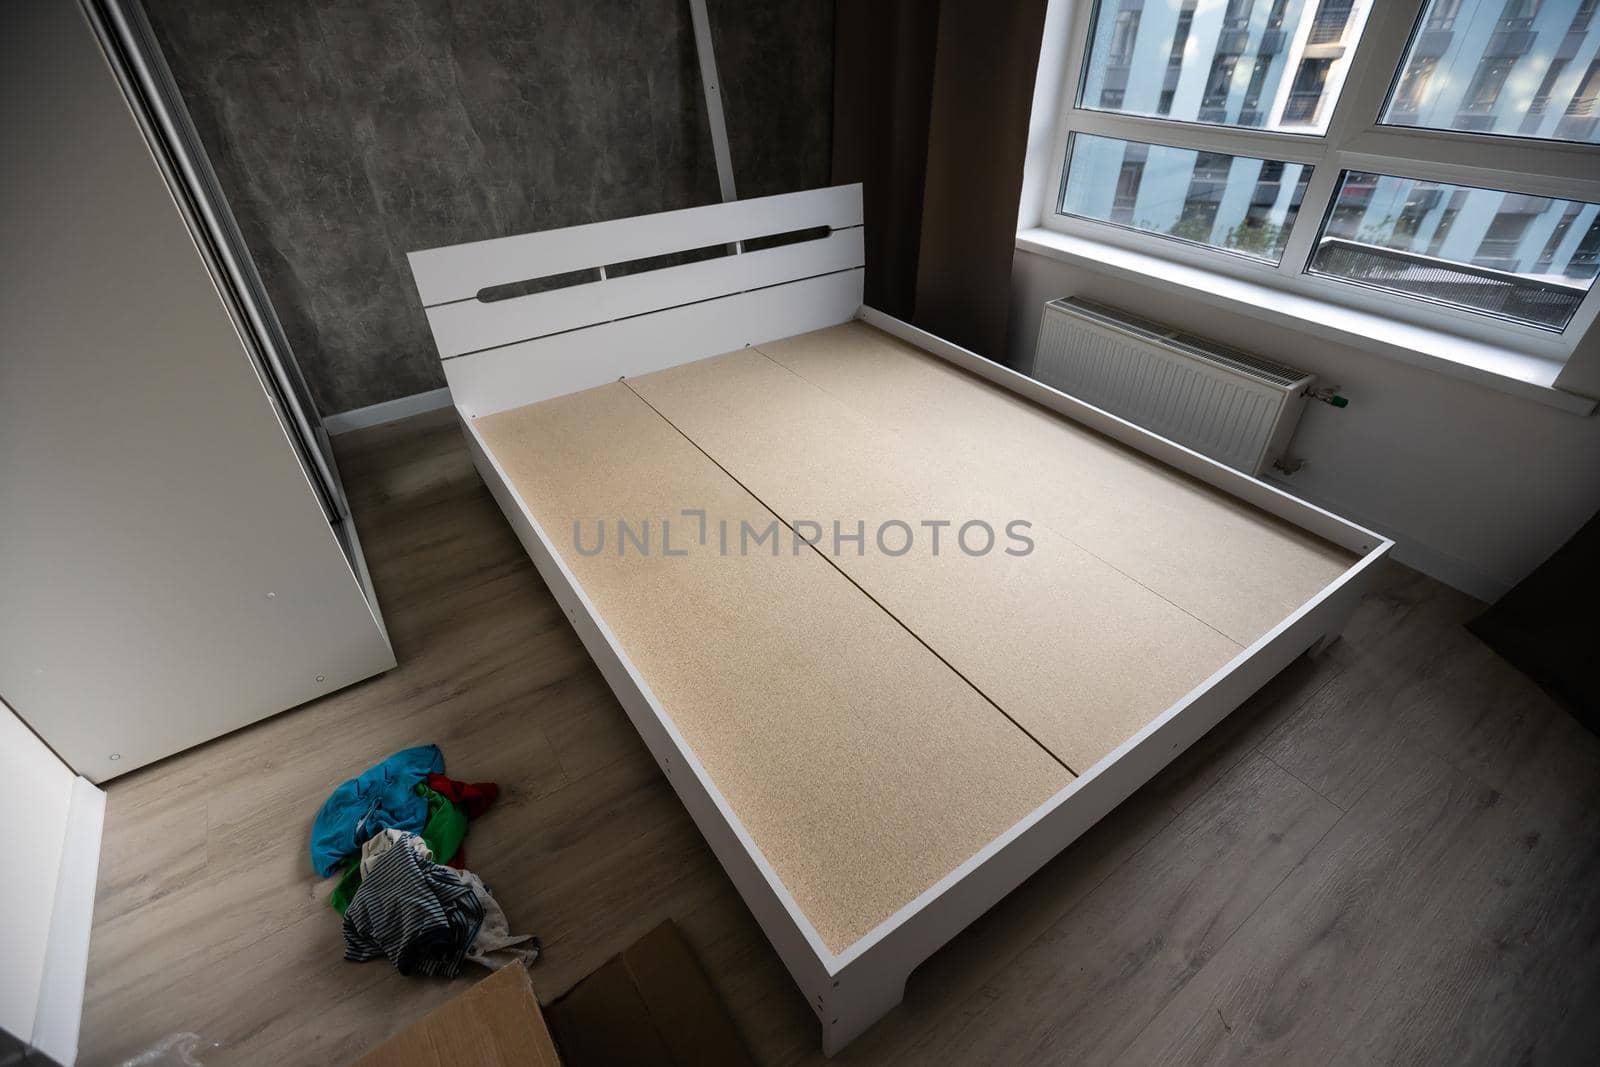 assembly of a double bed made of wood and lamella by Andelov13